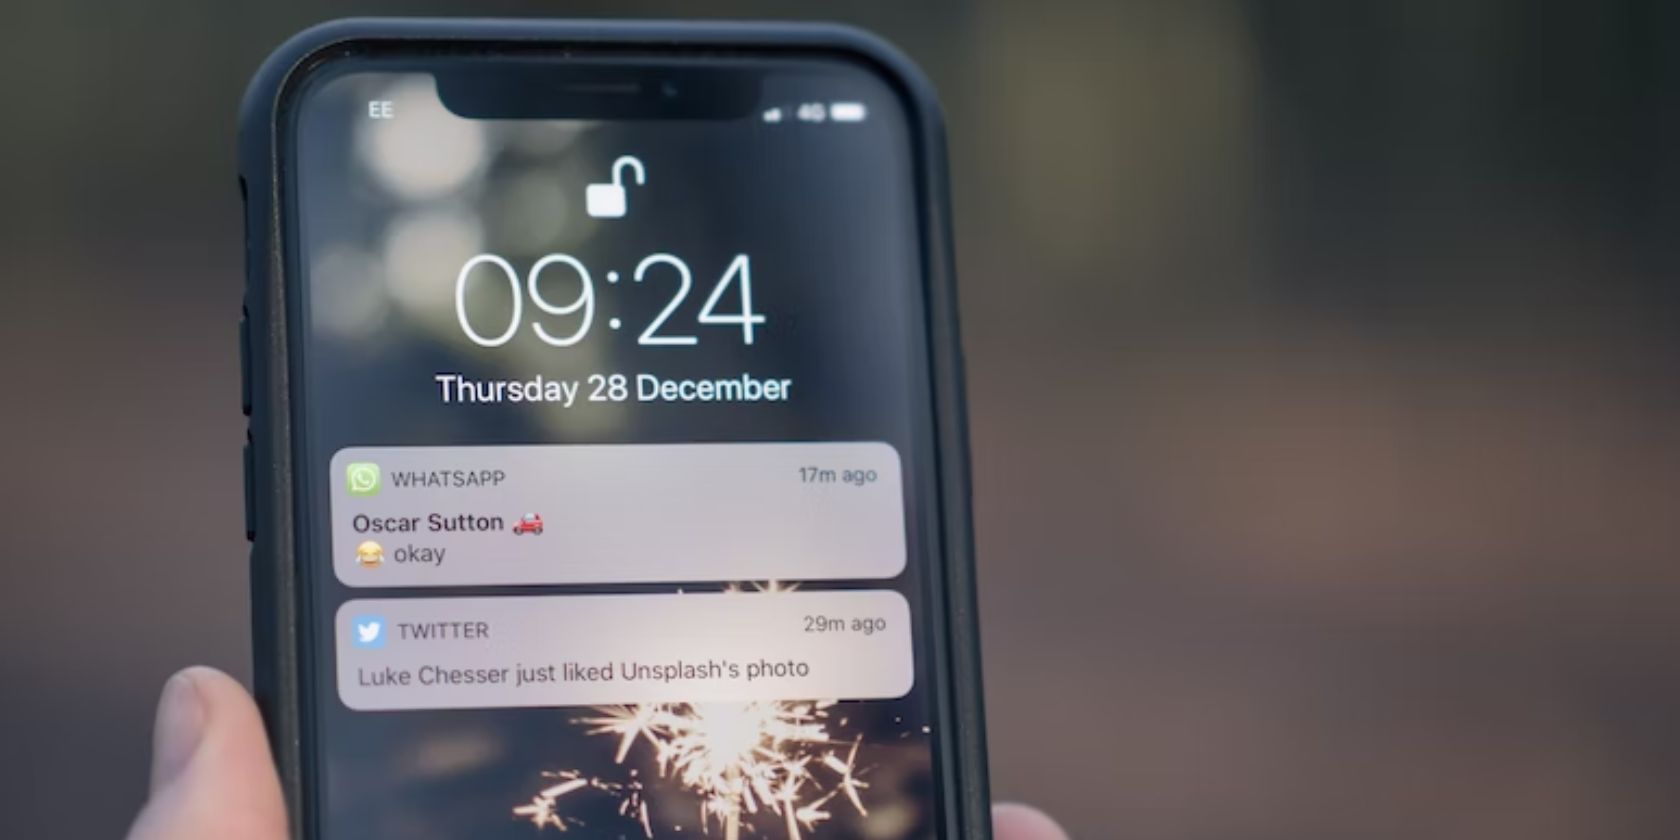 whatsapp and twitter notifications on iphone lock screen